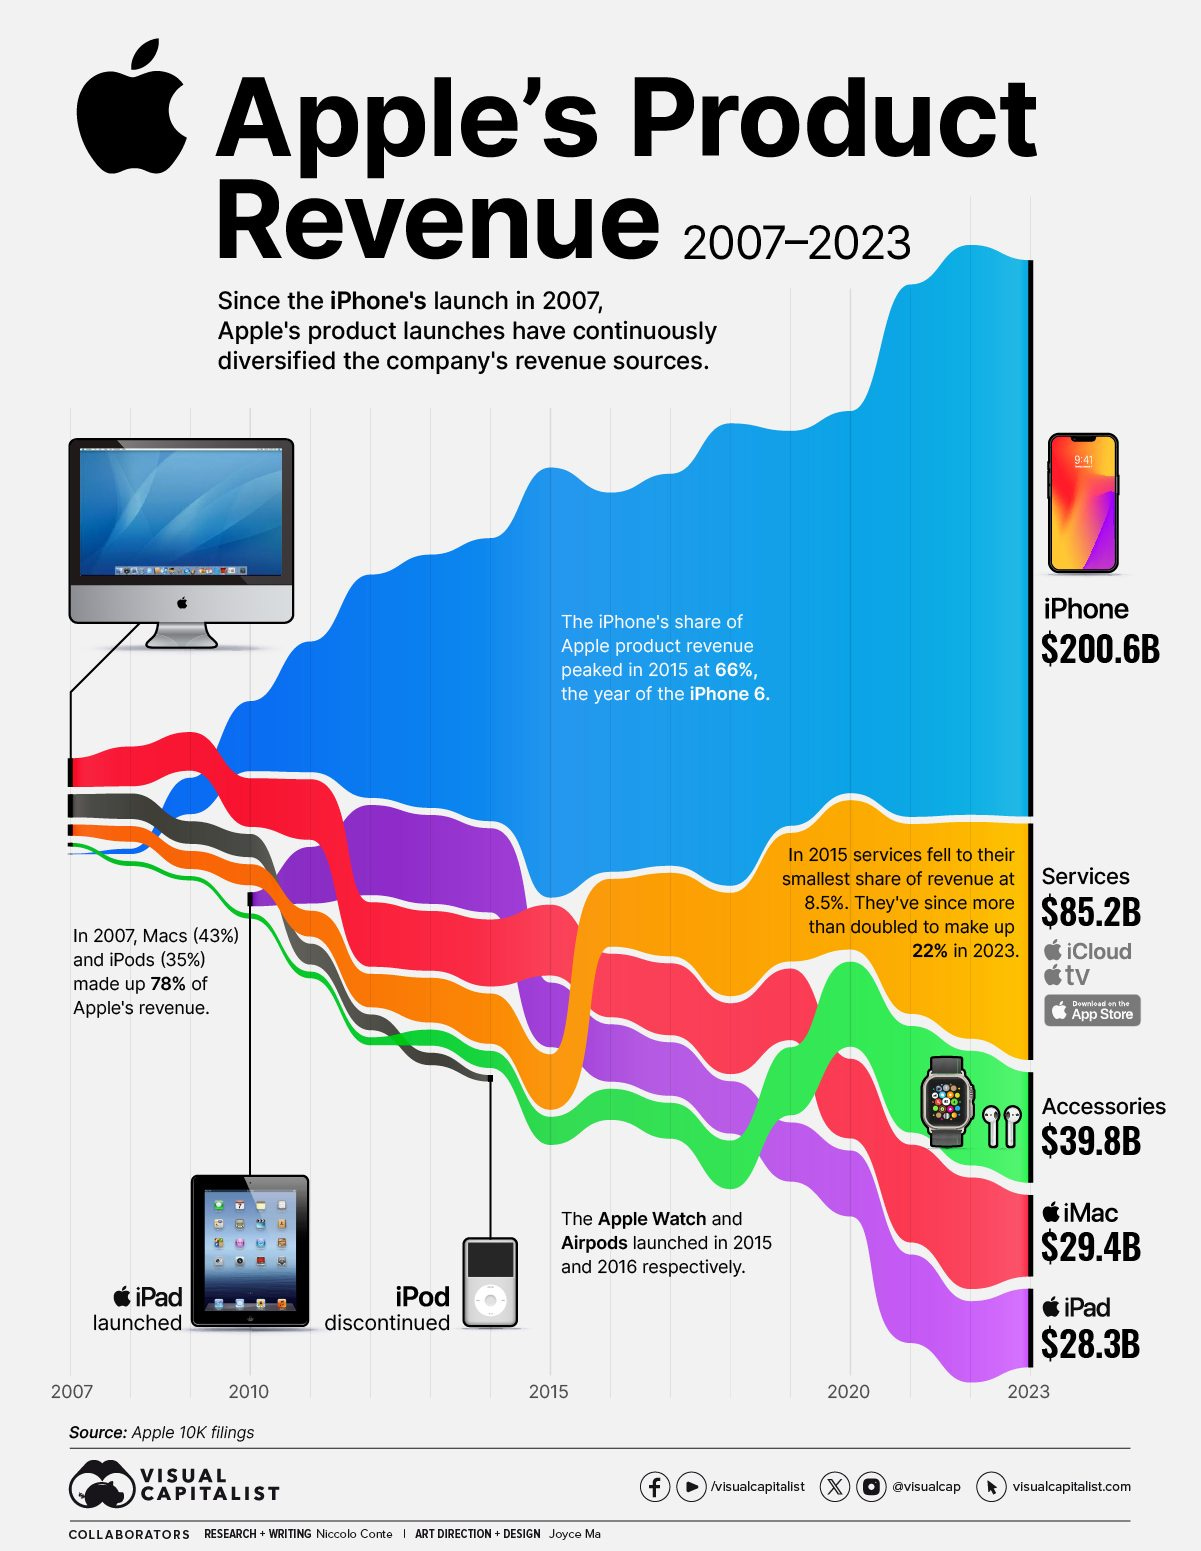 May be a graphic of text that says 'Apple's Product Revenue 2007-2023 Since the iPhone's launch in 2007, Apple's product launches have continuously diversified the company's revenue sources. ÛATO The iPhone's Ûh”of Aeproduct product evenue 2015 at66% the year the iPhone iPhone $200.6B In2007, Macs (43%) iPods (35%) Apple's revenue. services fell smallest revenue Services 8.5%. They've since more $85.2B than doubled 22% 2023. iCloud tv AppStre iPad launched 11 Accessories $39.8B The Apple Watch and Airpods launched 2015 and respectively. iPod discontinued 2007 2010 Source: Apple Mac $29.4B filings 2015 2020 iPad $28.3B 2023 COLLABORATORS RESEARCH WRITING Niccolo Conte /visualcapitalist Joyce @visualcap visualcapitalist.com'